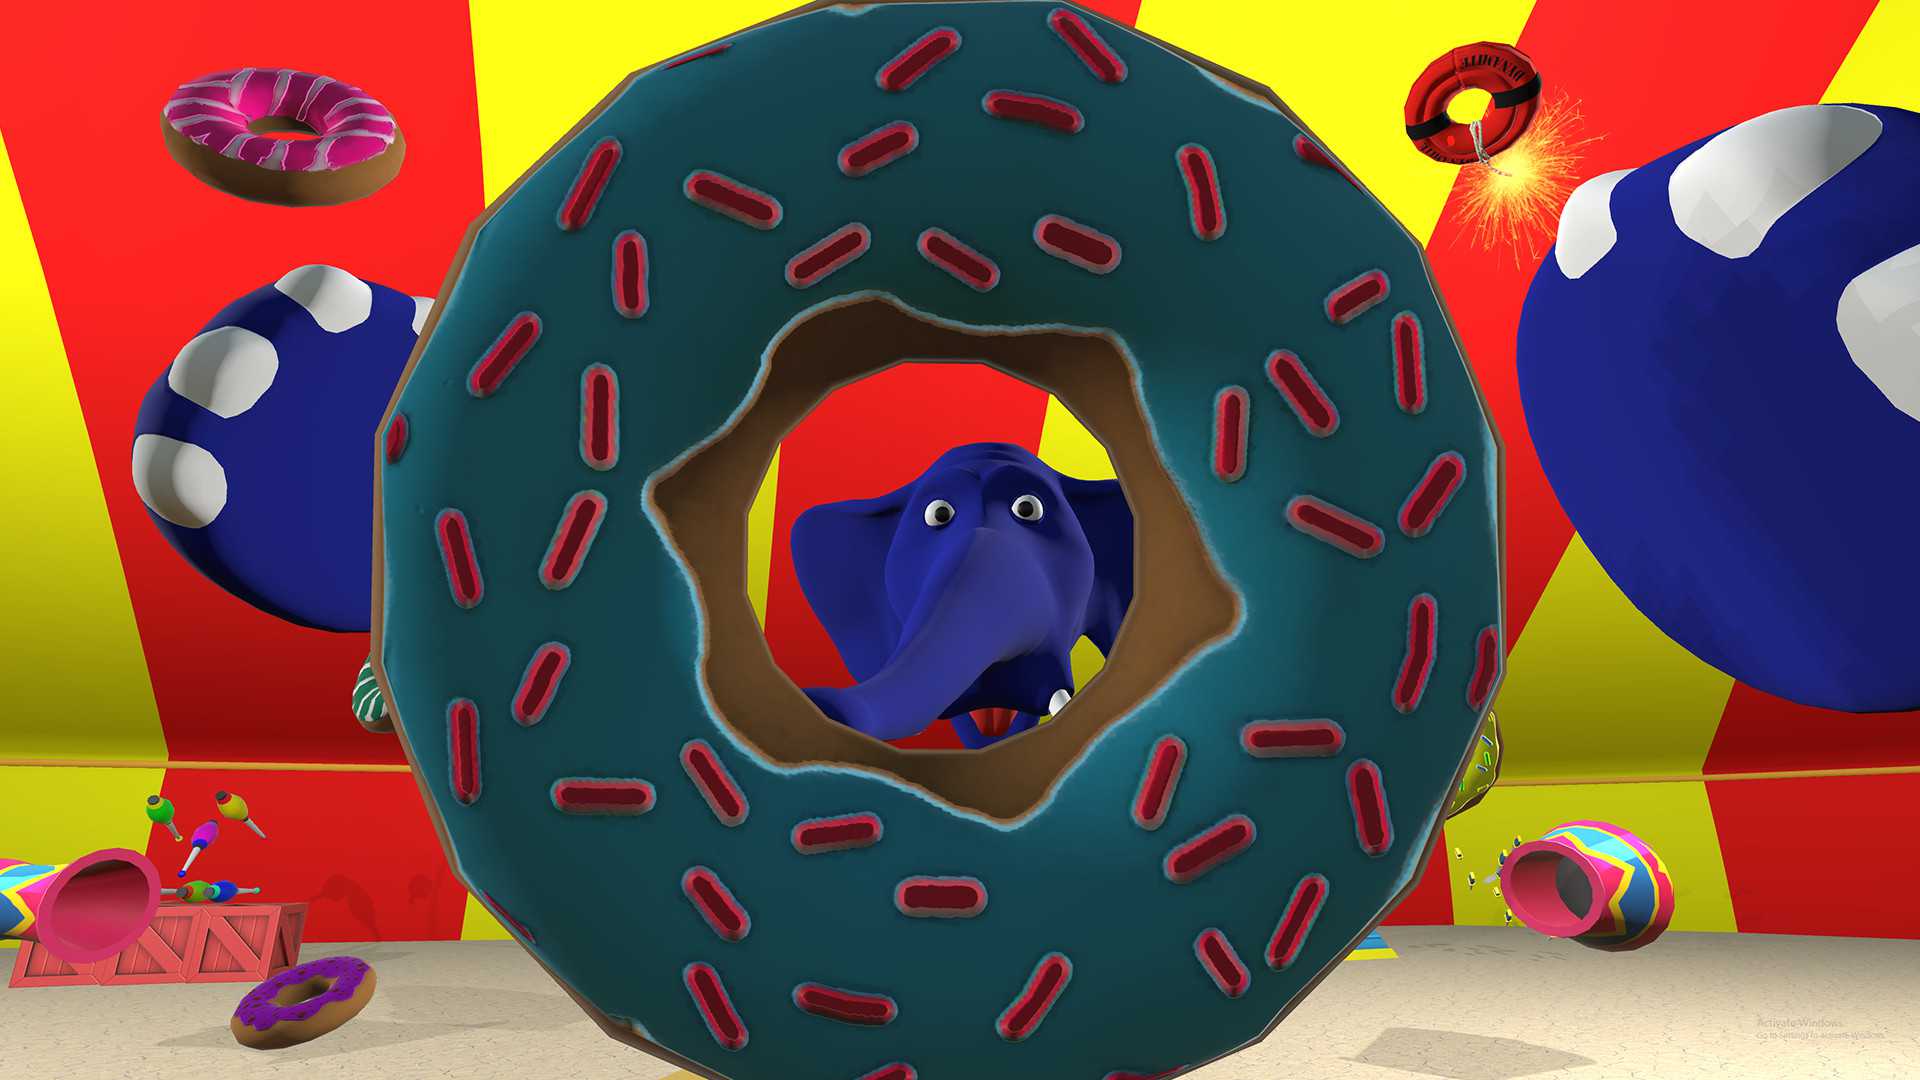 Donut Distraction